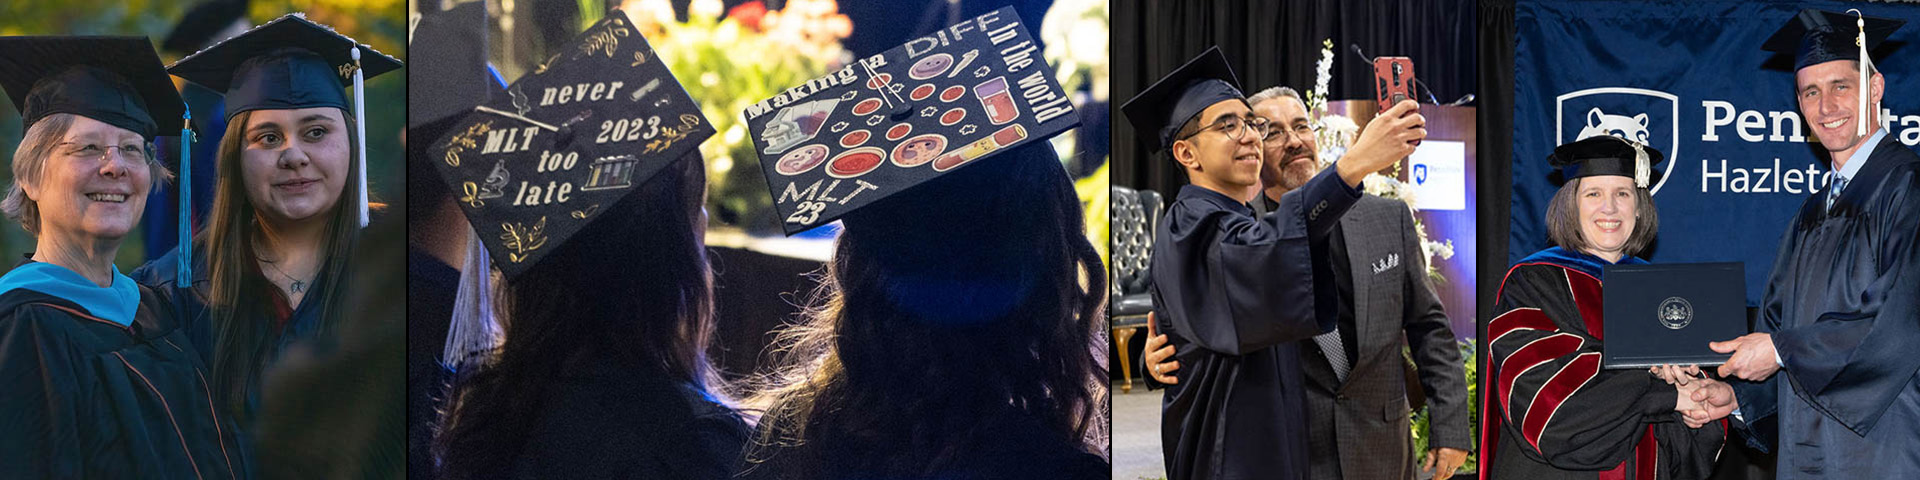 Four photos of graduation scenes. Female professor and female graduate both wearing graduation regalia. Two female graduates with their caps decorated. A male graduate in regalia taking a selfie with his father. A female administrator shaking hands with a male graduate and handing him his diploma.